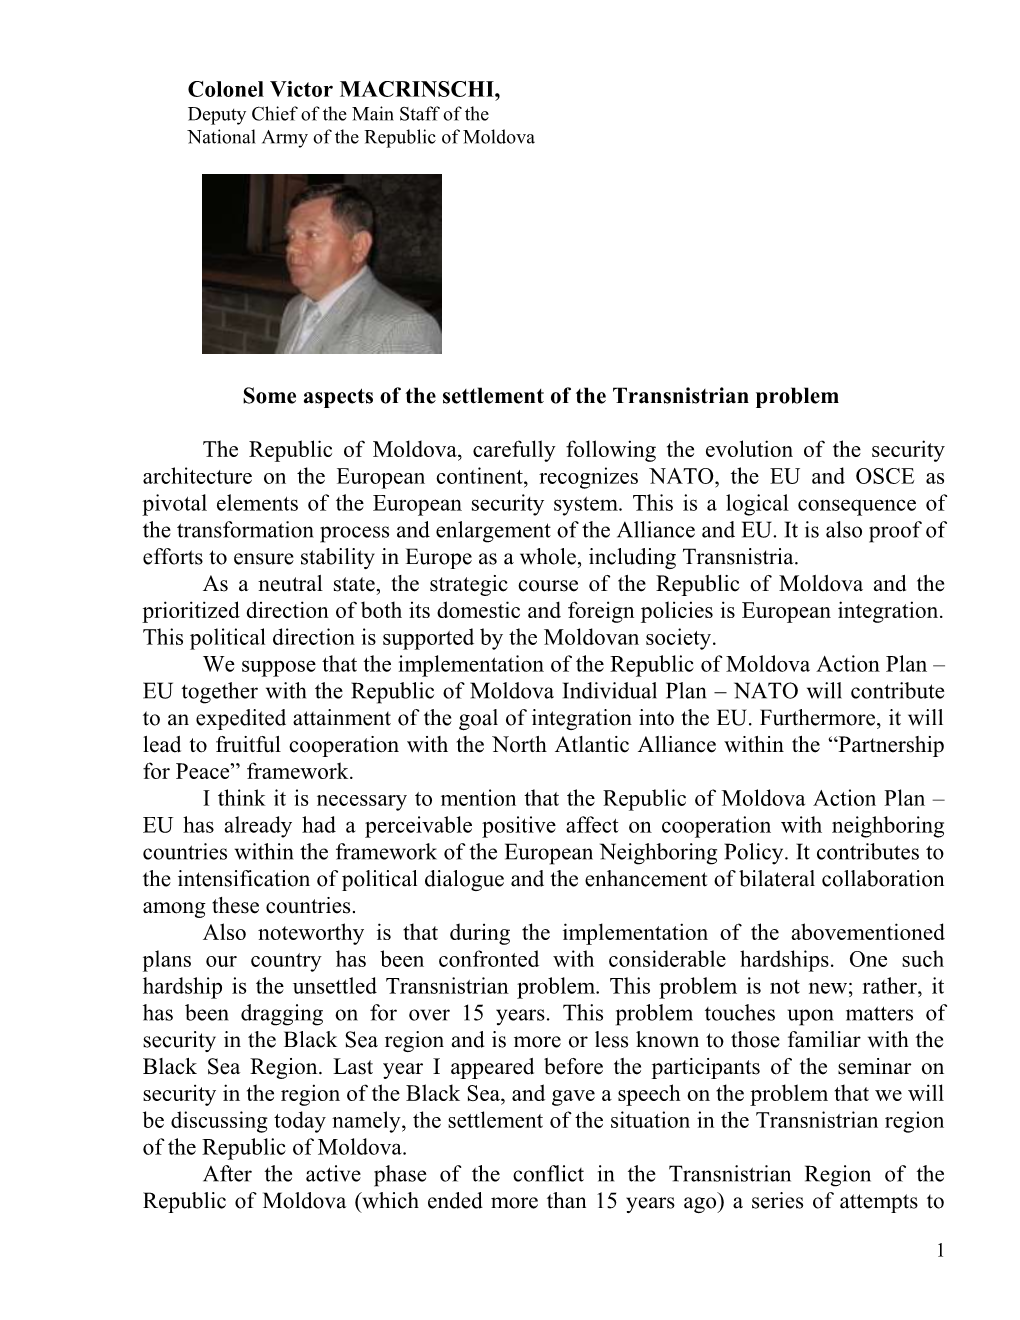 Some Aspects of Transnistrian Problem Settlement